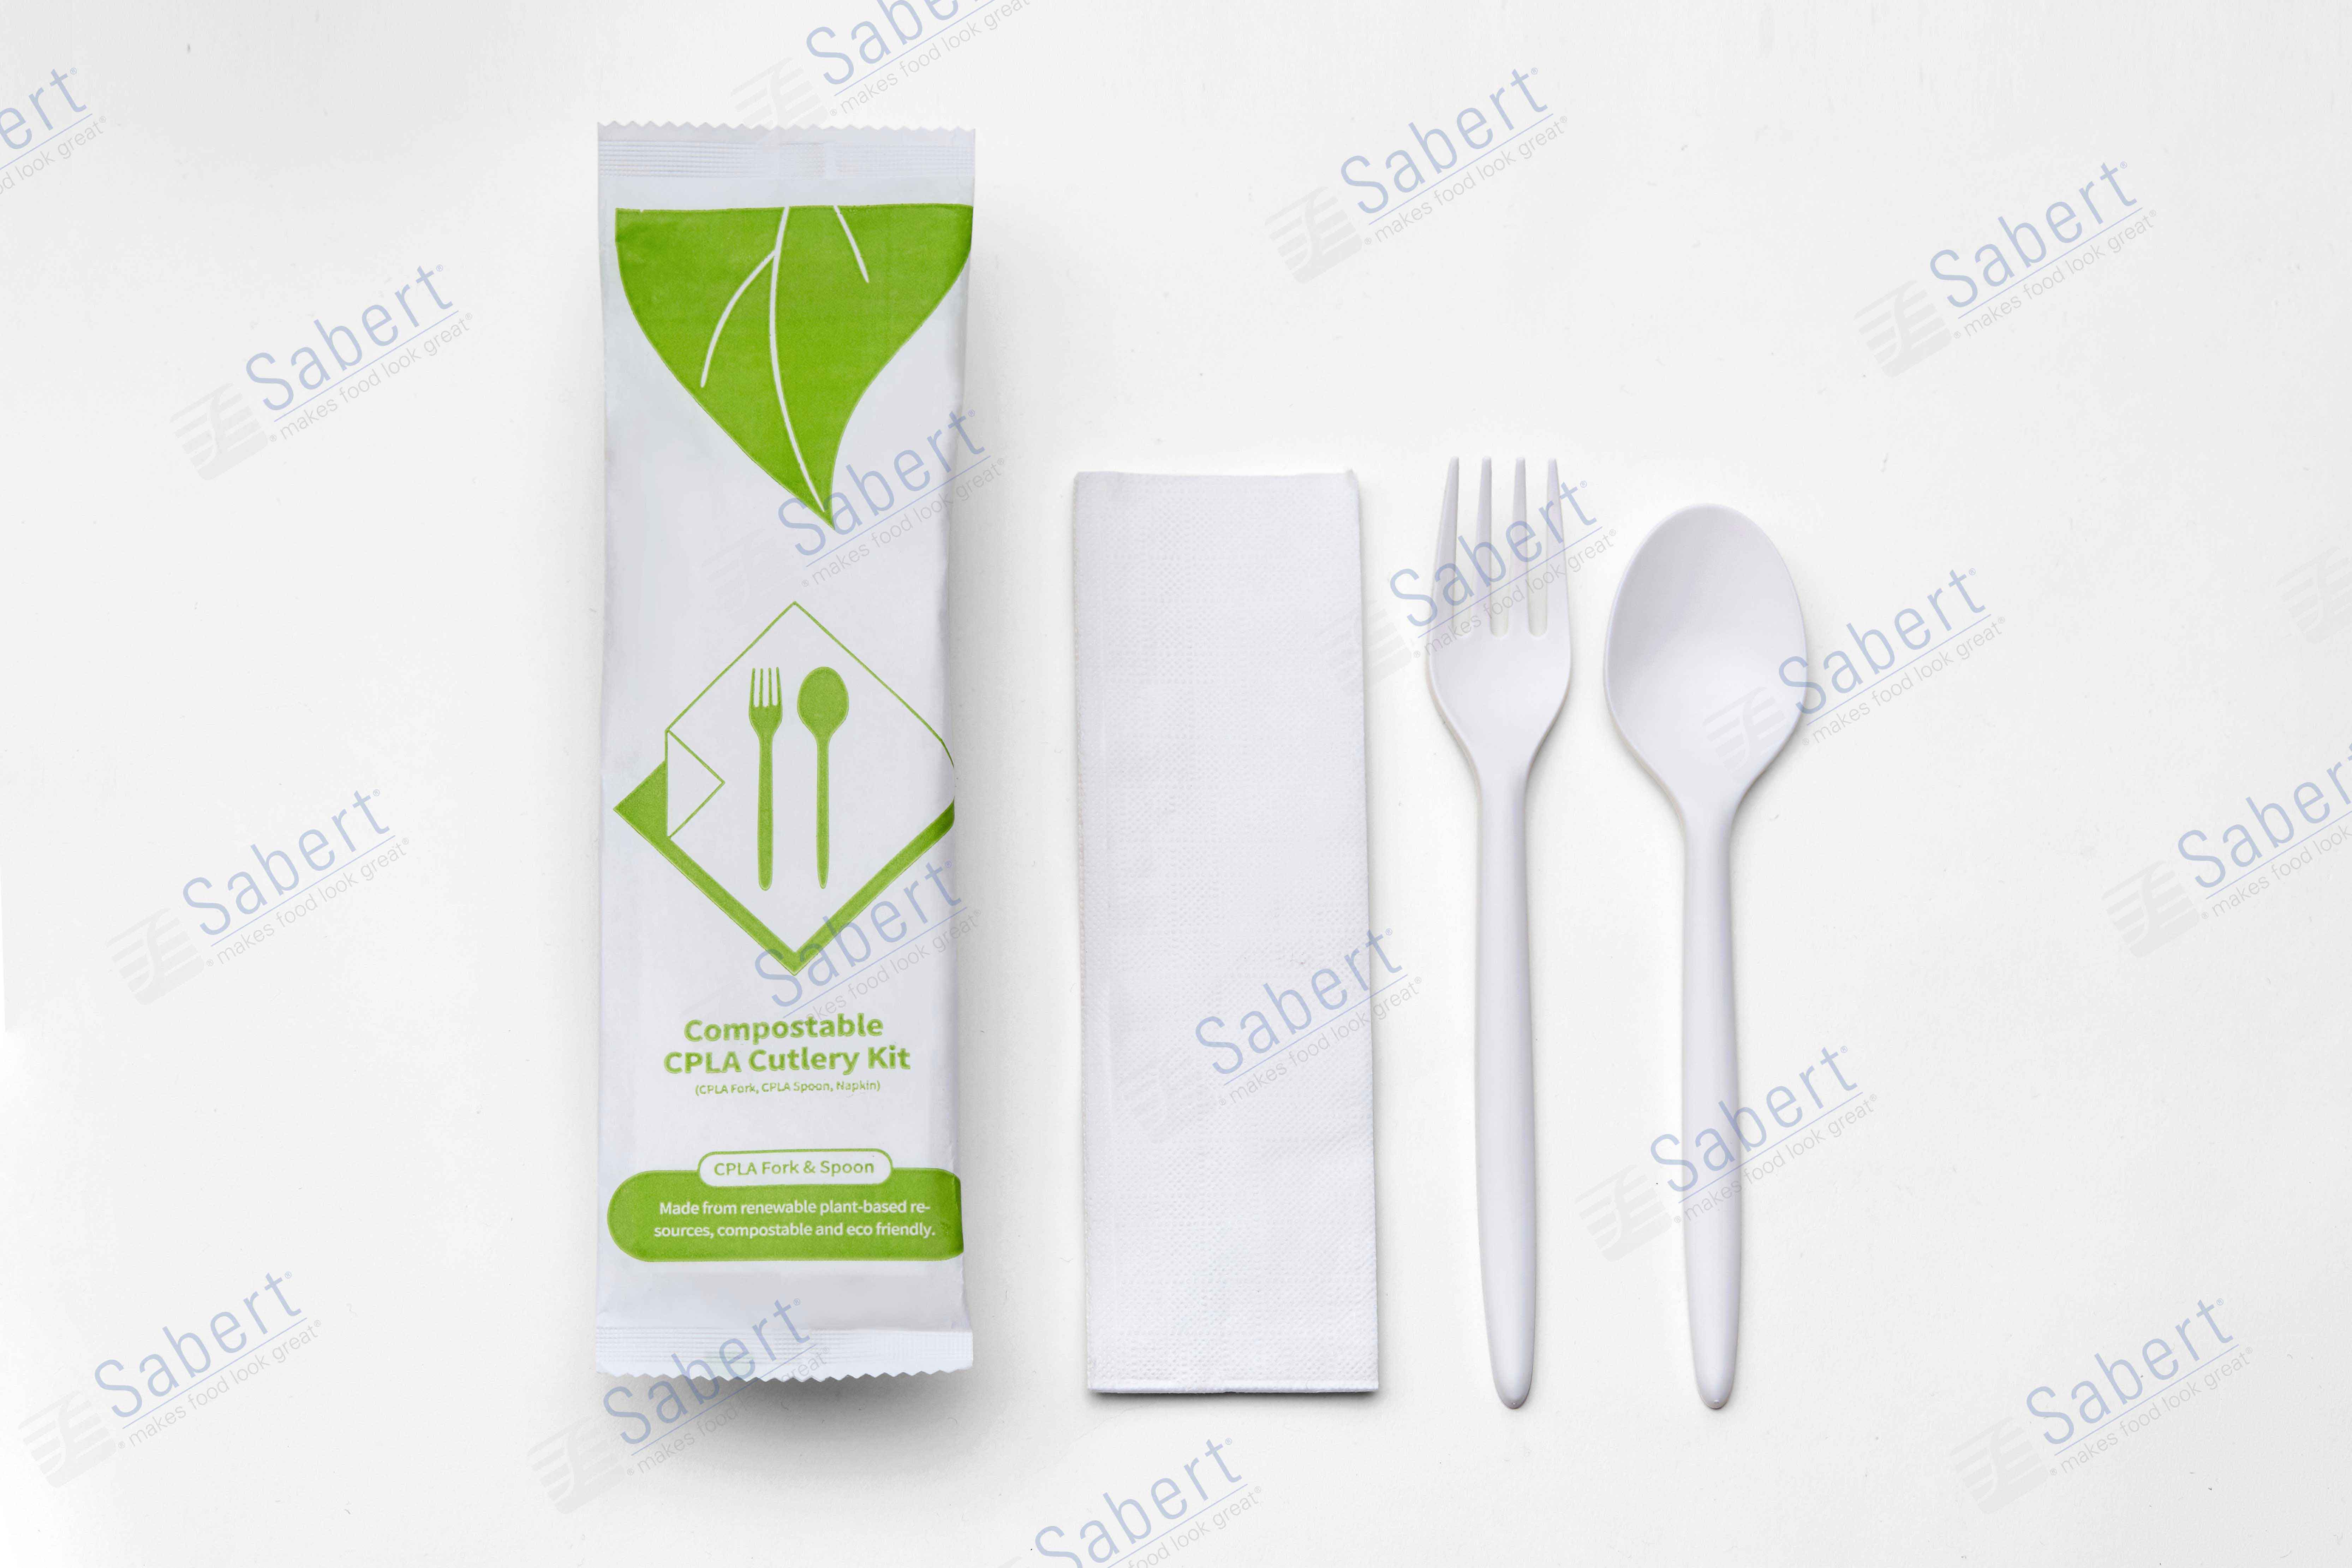 Compostable CPLA Cutlery Kit 3 in 1 (CPLA Fork, CPLA Spoon, Napkin) - white paper pack